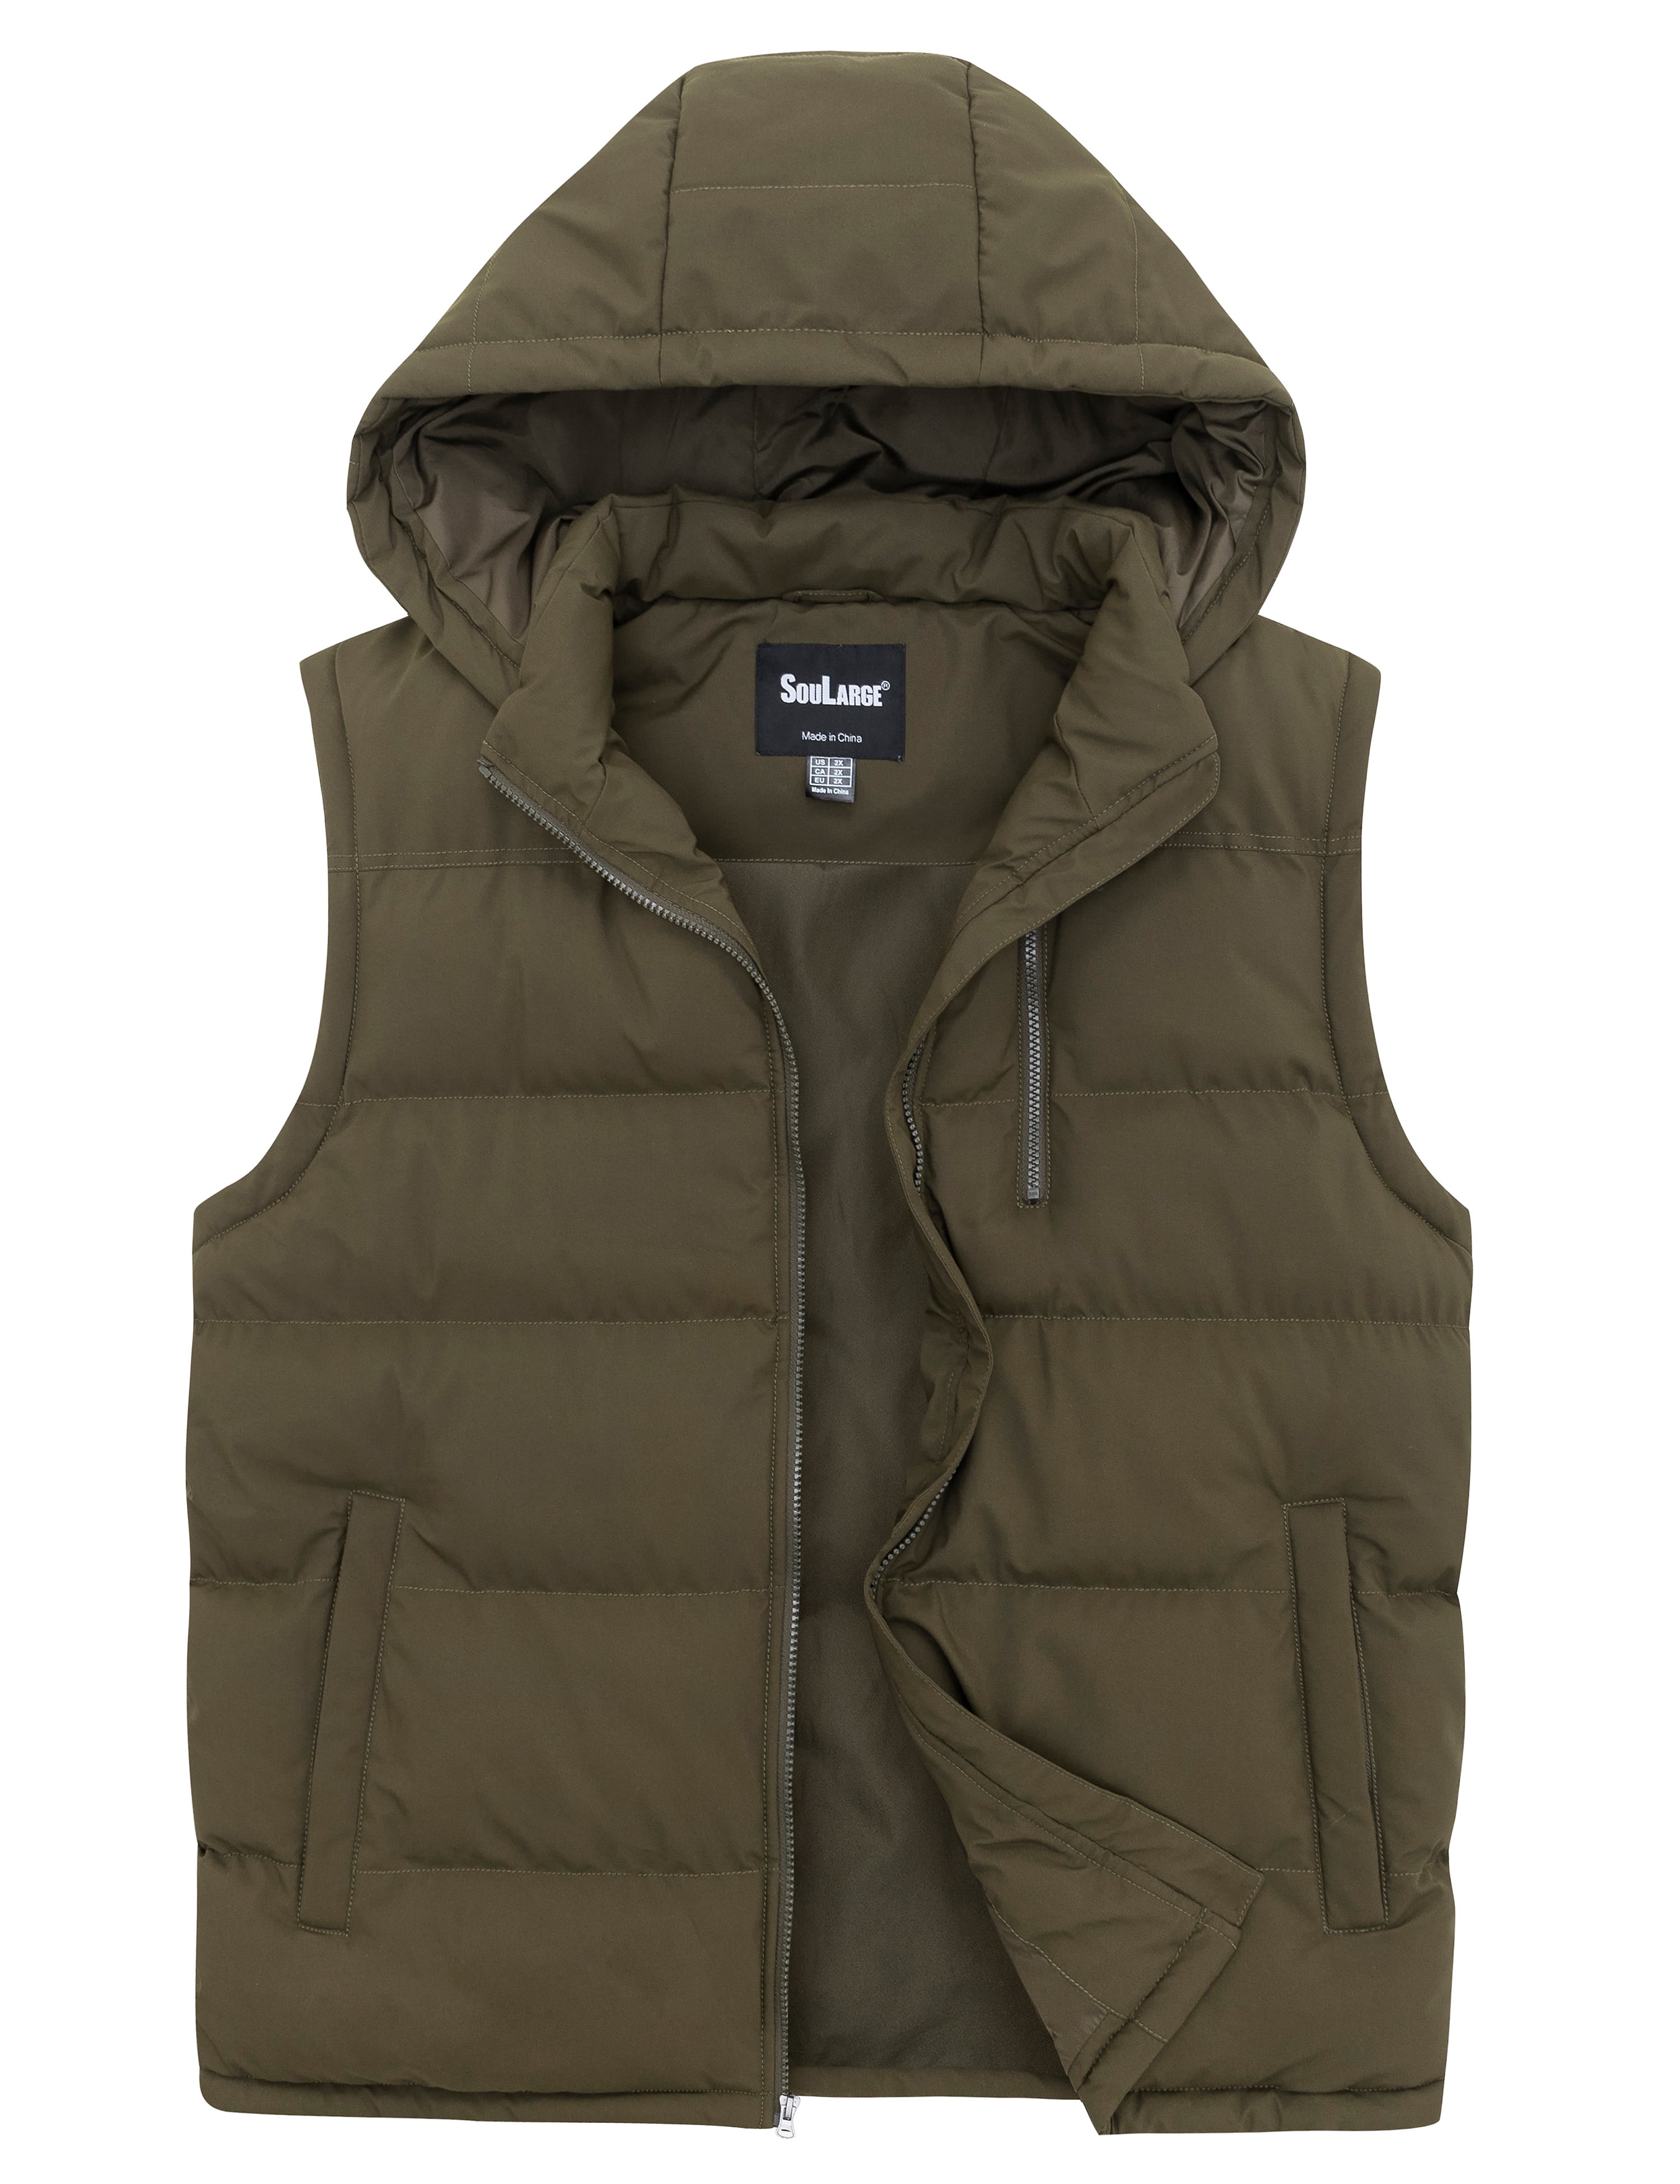 Soularge Men's Big and Tall Hooded Casual Winter Waterproof Warm Vest ...